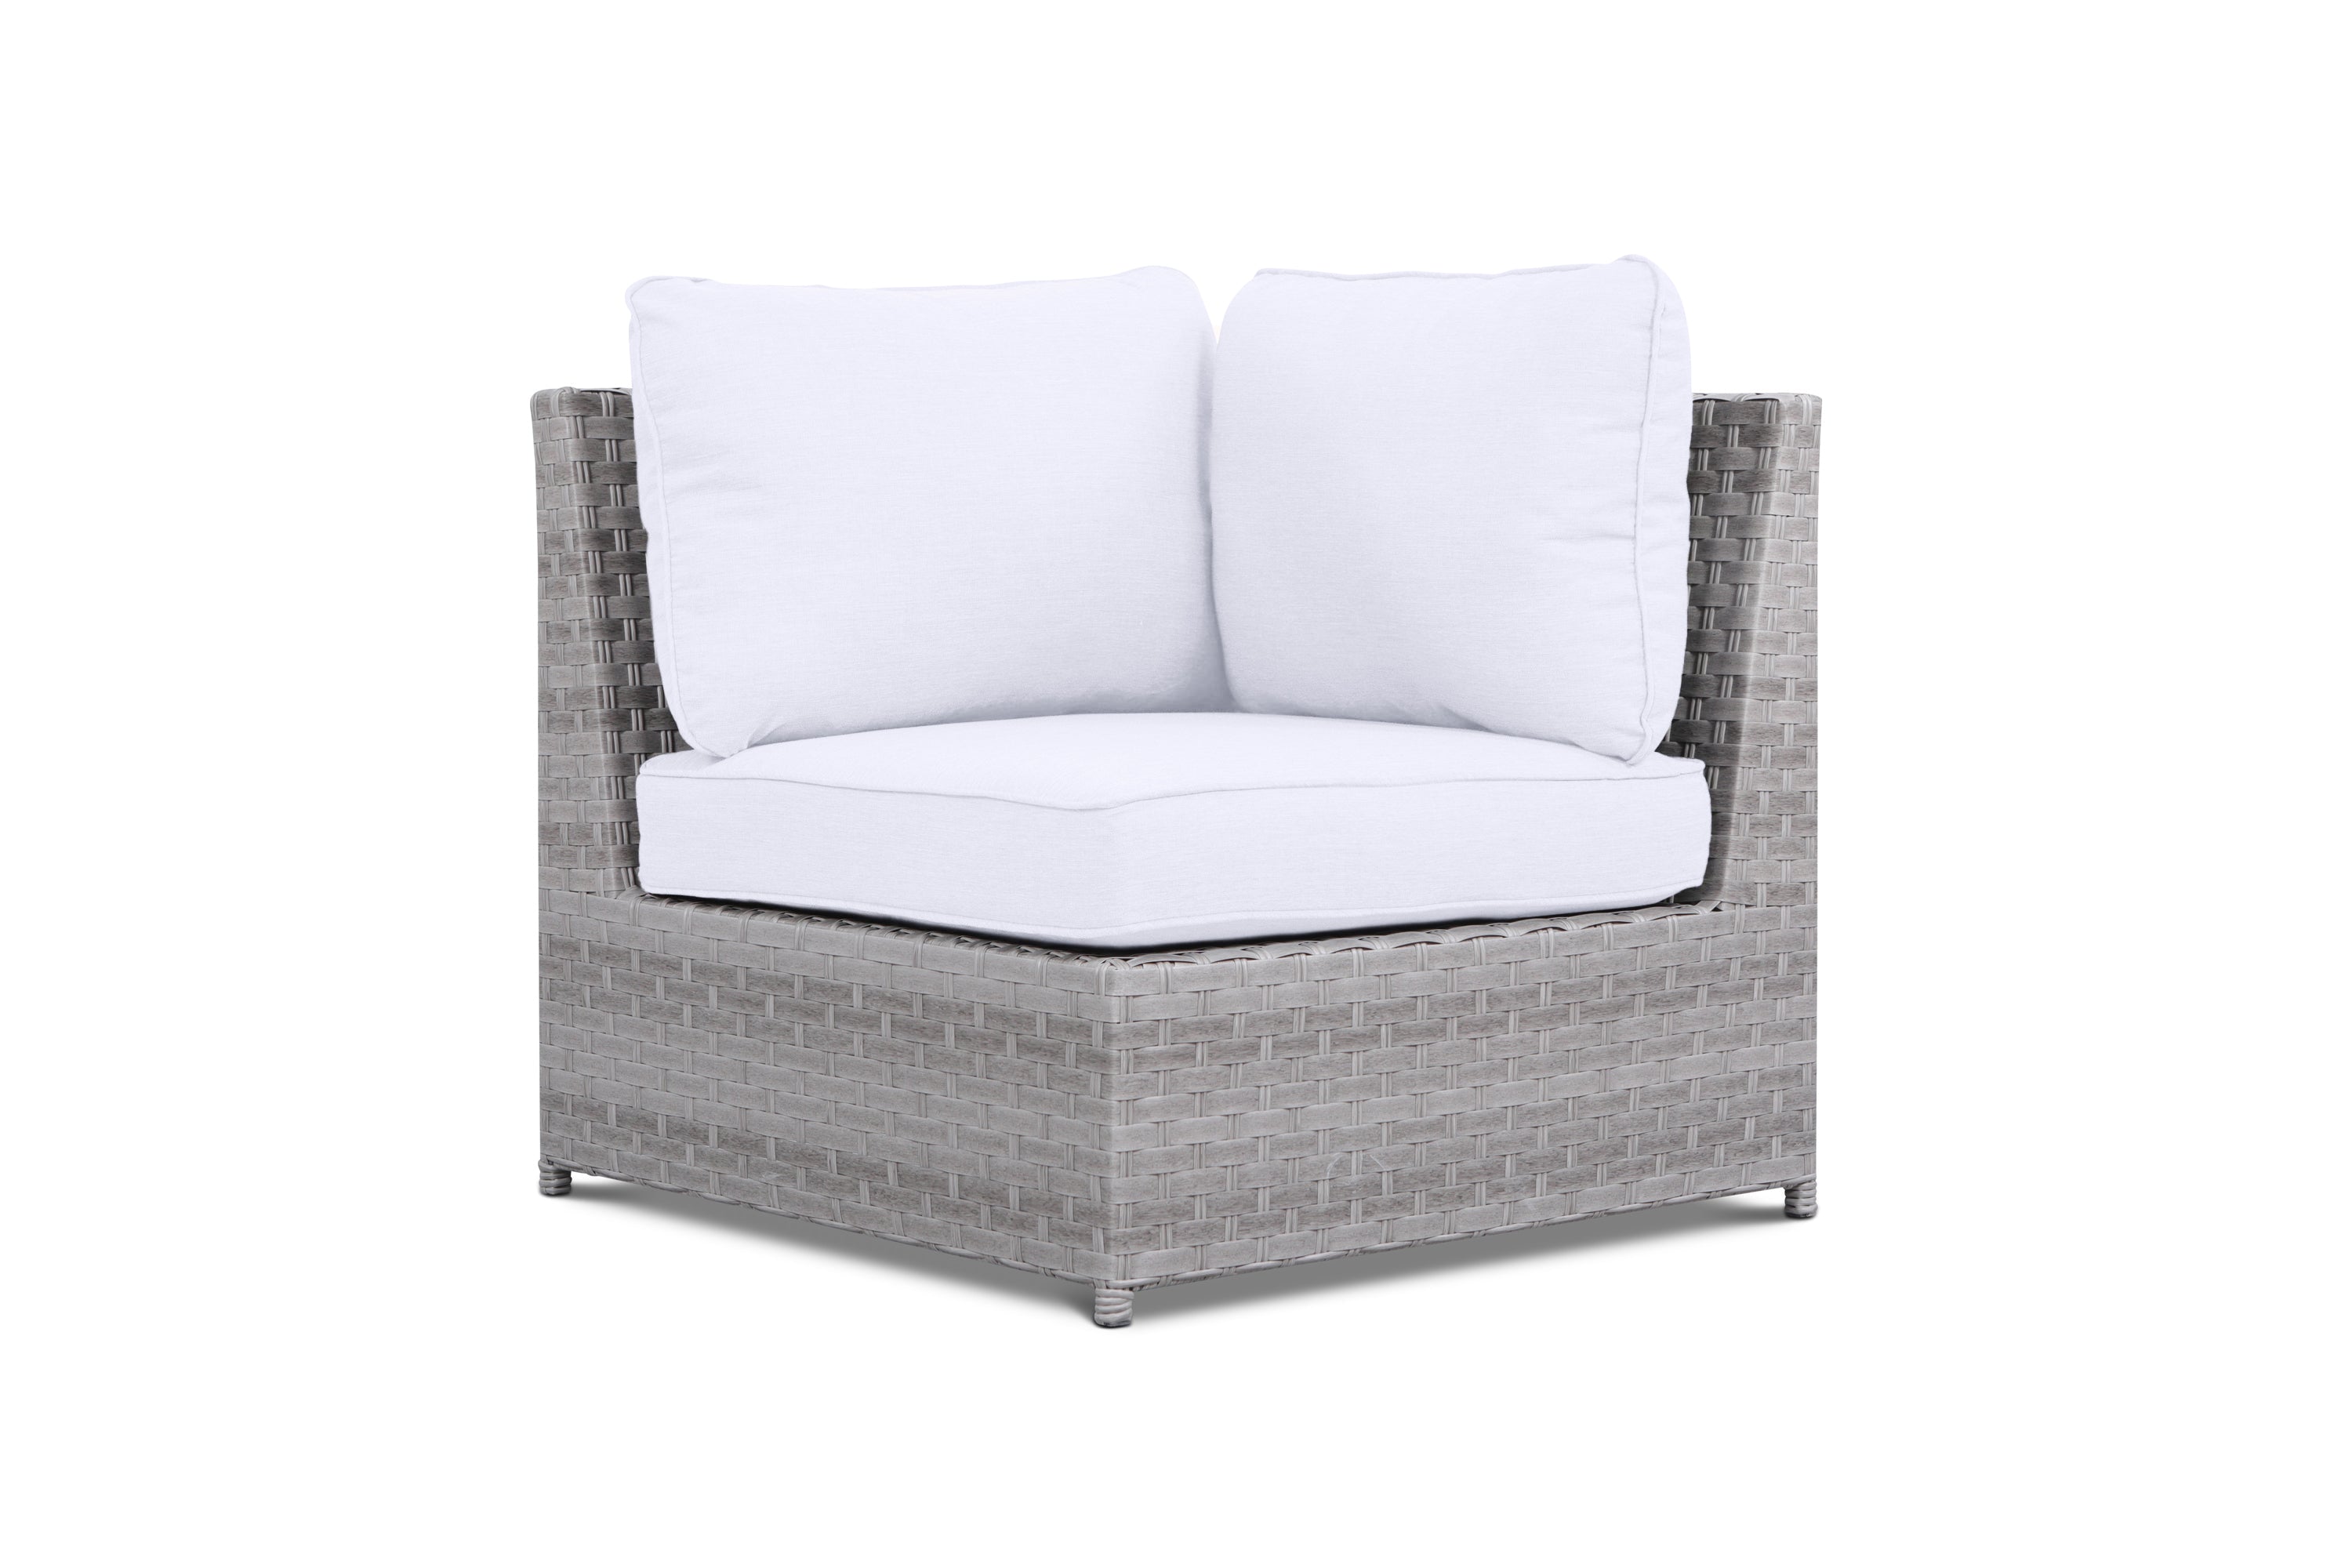 Kensington Ivory 7 Piece Outdoor Sectional Set with End Tables